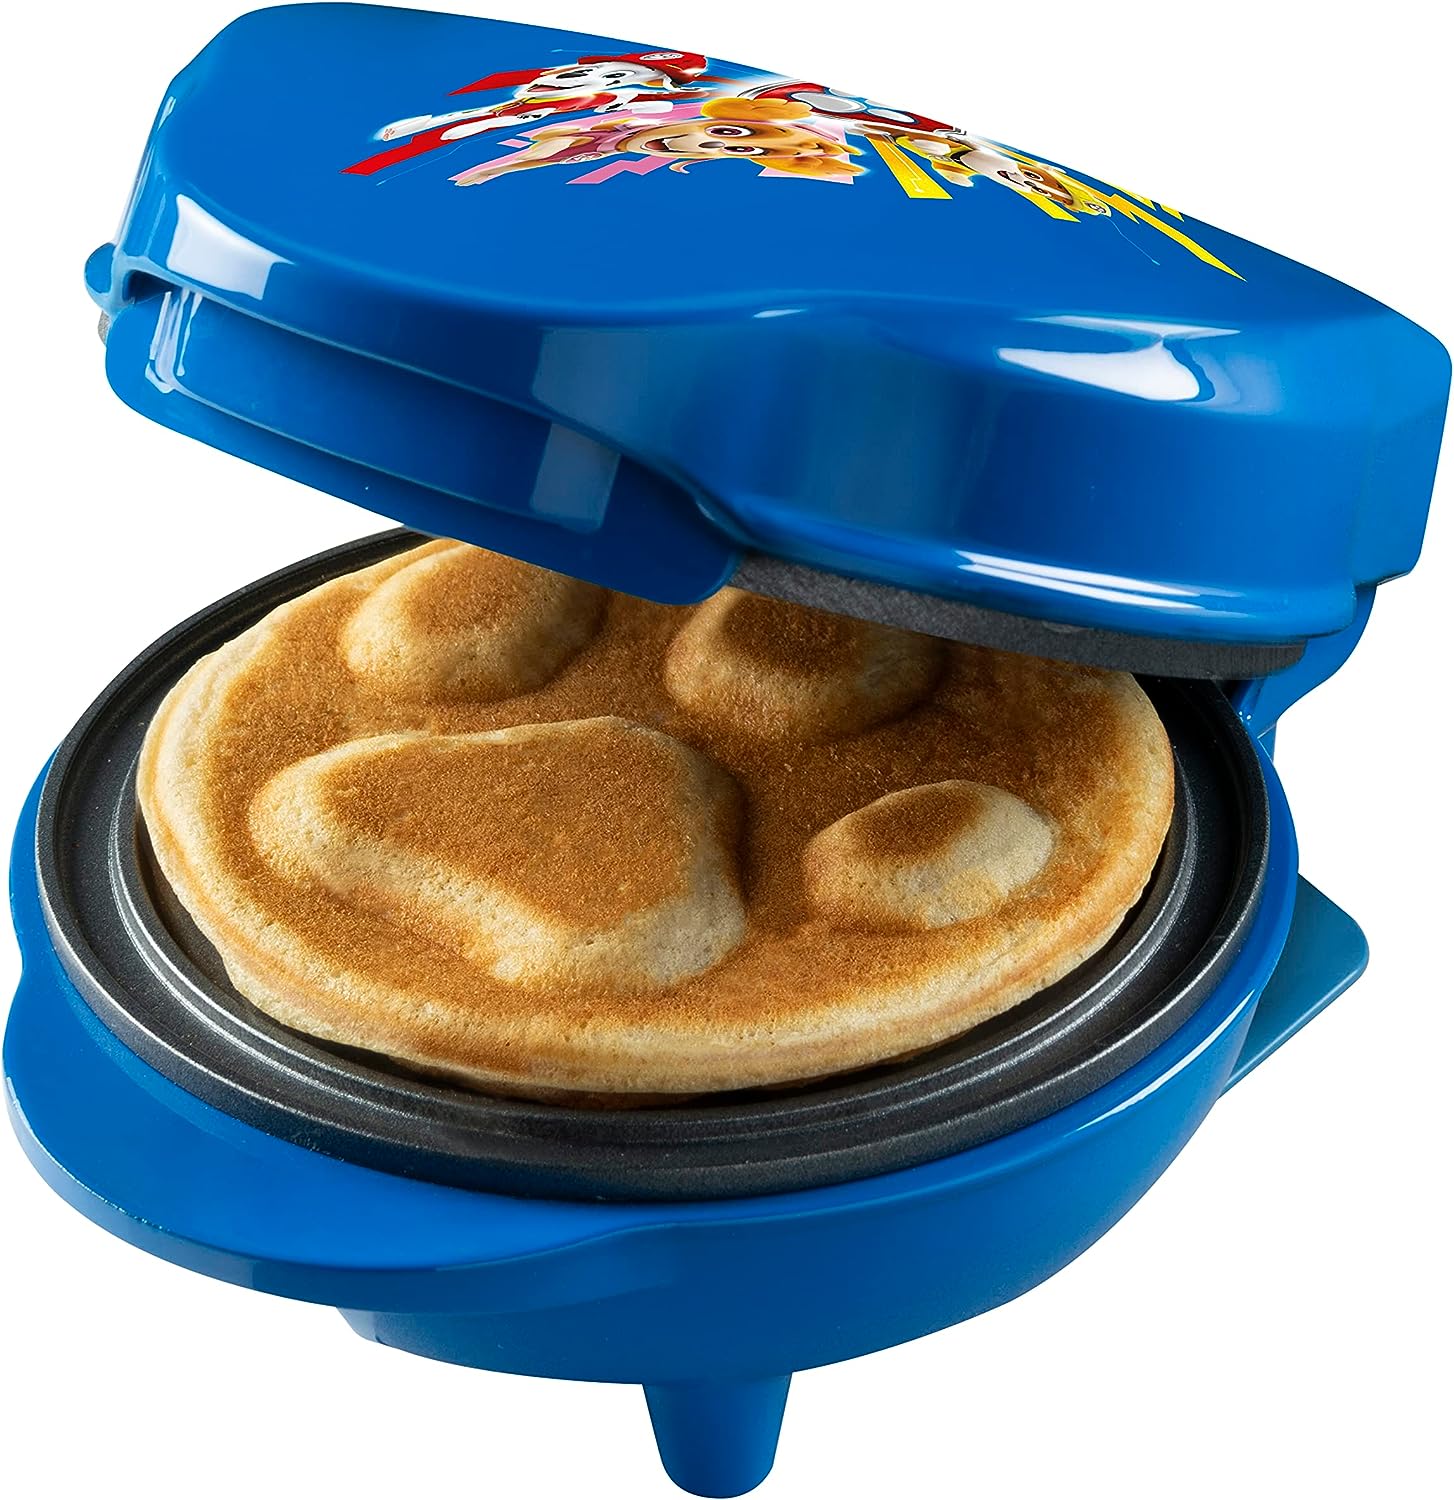 Paw Patrol Waffle Iron, Mini Waffle Iron in Unique Paw Patrol Design, for Children\'s Birthdays, Easter and Christmas, Includes Baking Light, Waffle Size: Diameter 10 cm, Officially Licensed Product,